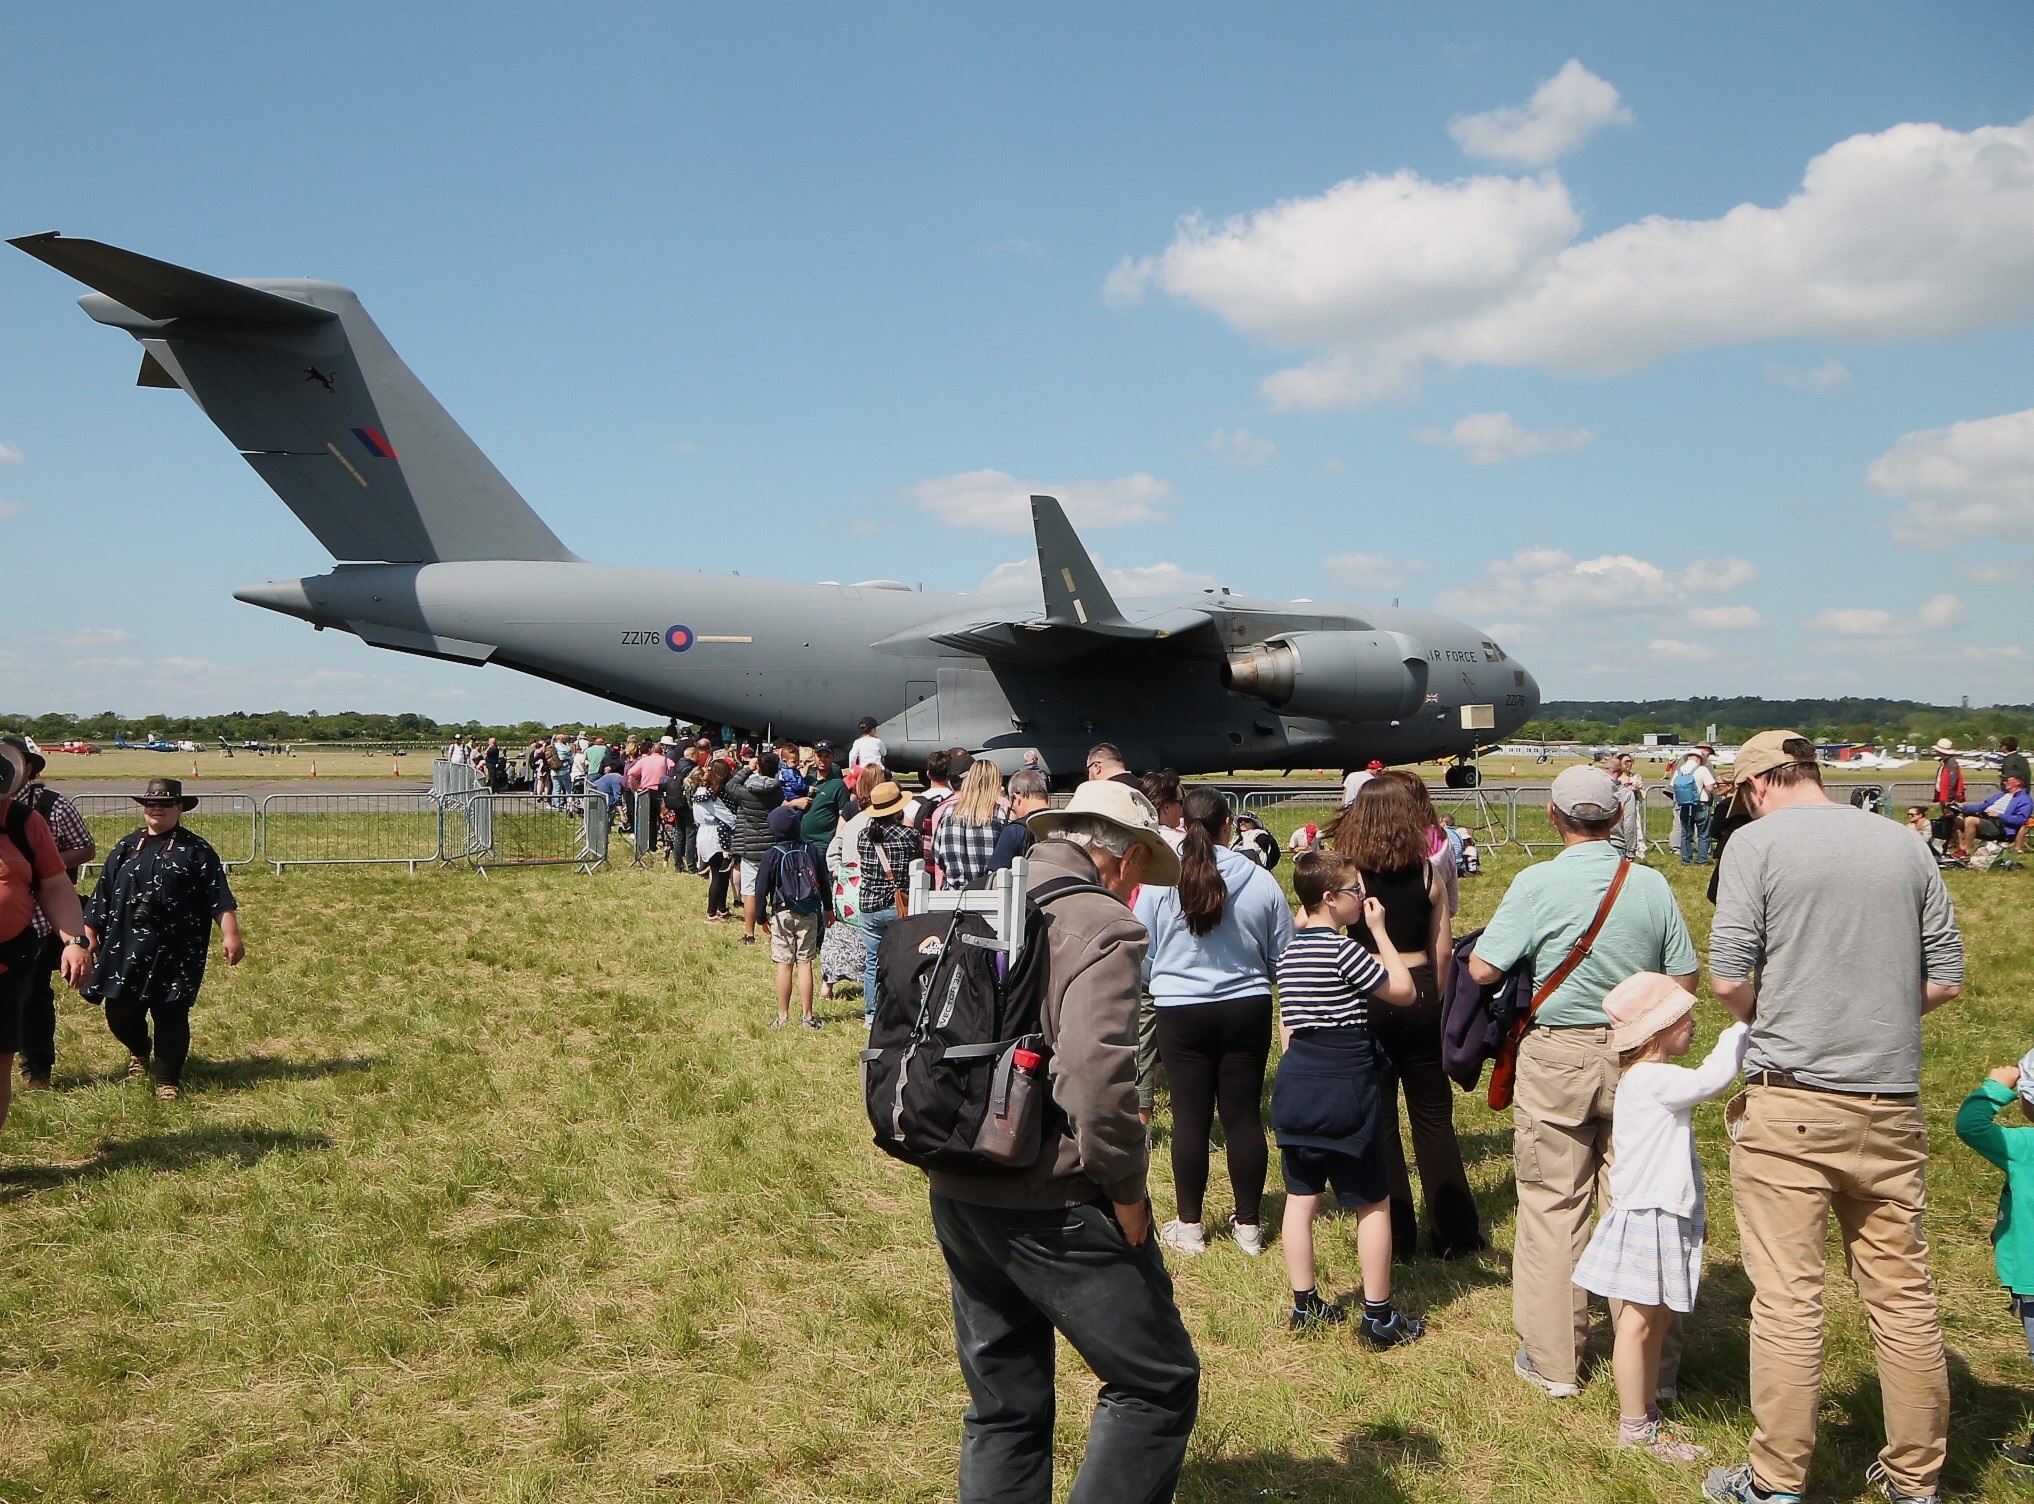 A RAF C-17 Globmaster also featured at the Abingdon Air and Country Show.